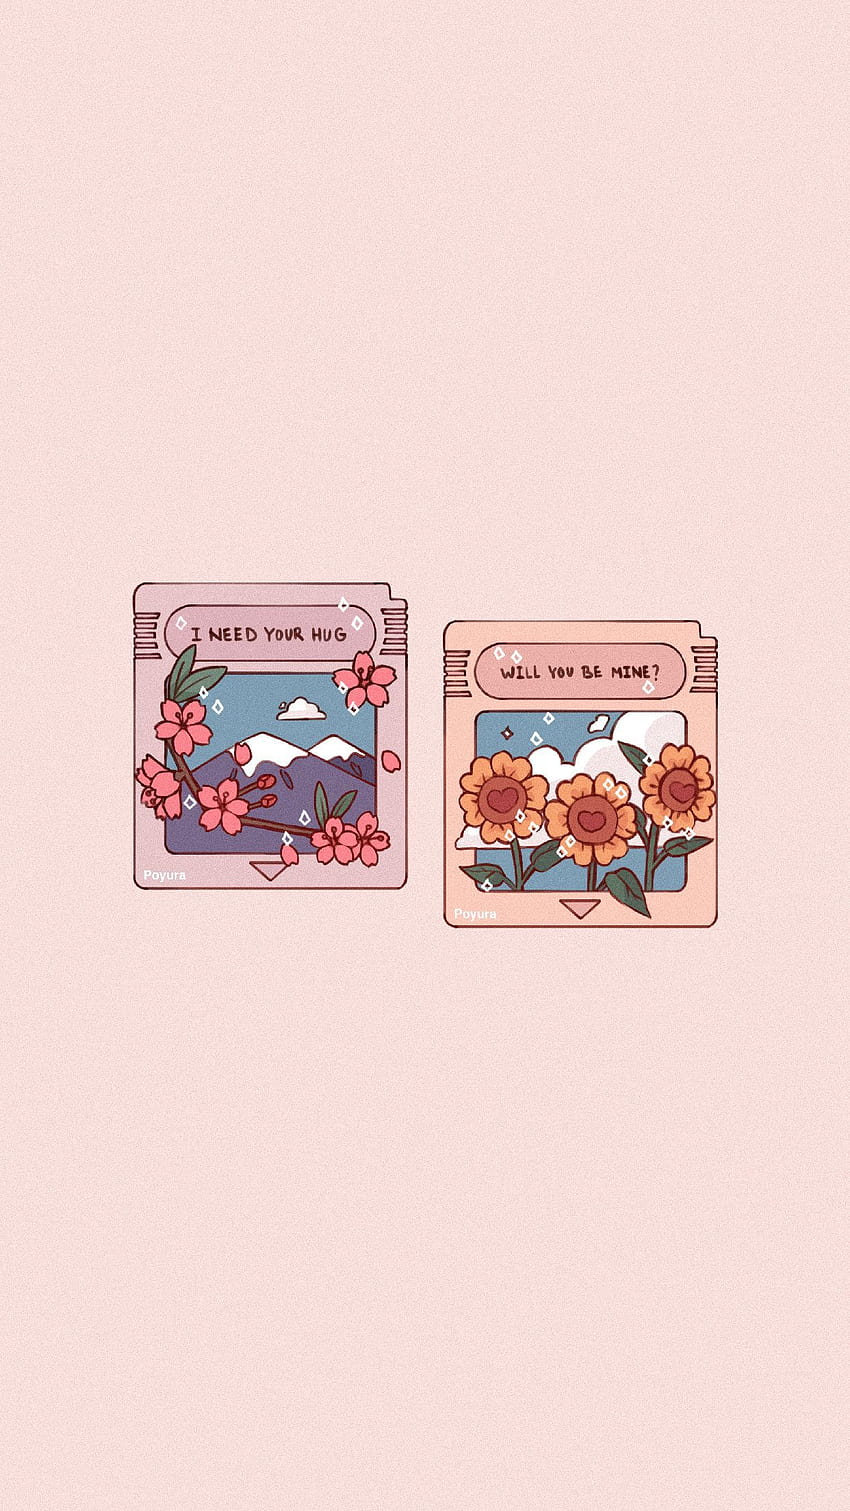 Aesthetic phone background of two cartoon pictures of flowers and a mountain - Nintendo